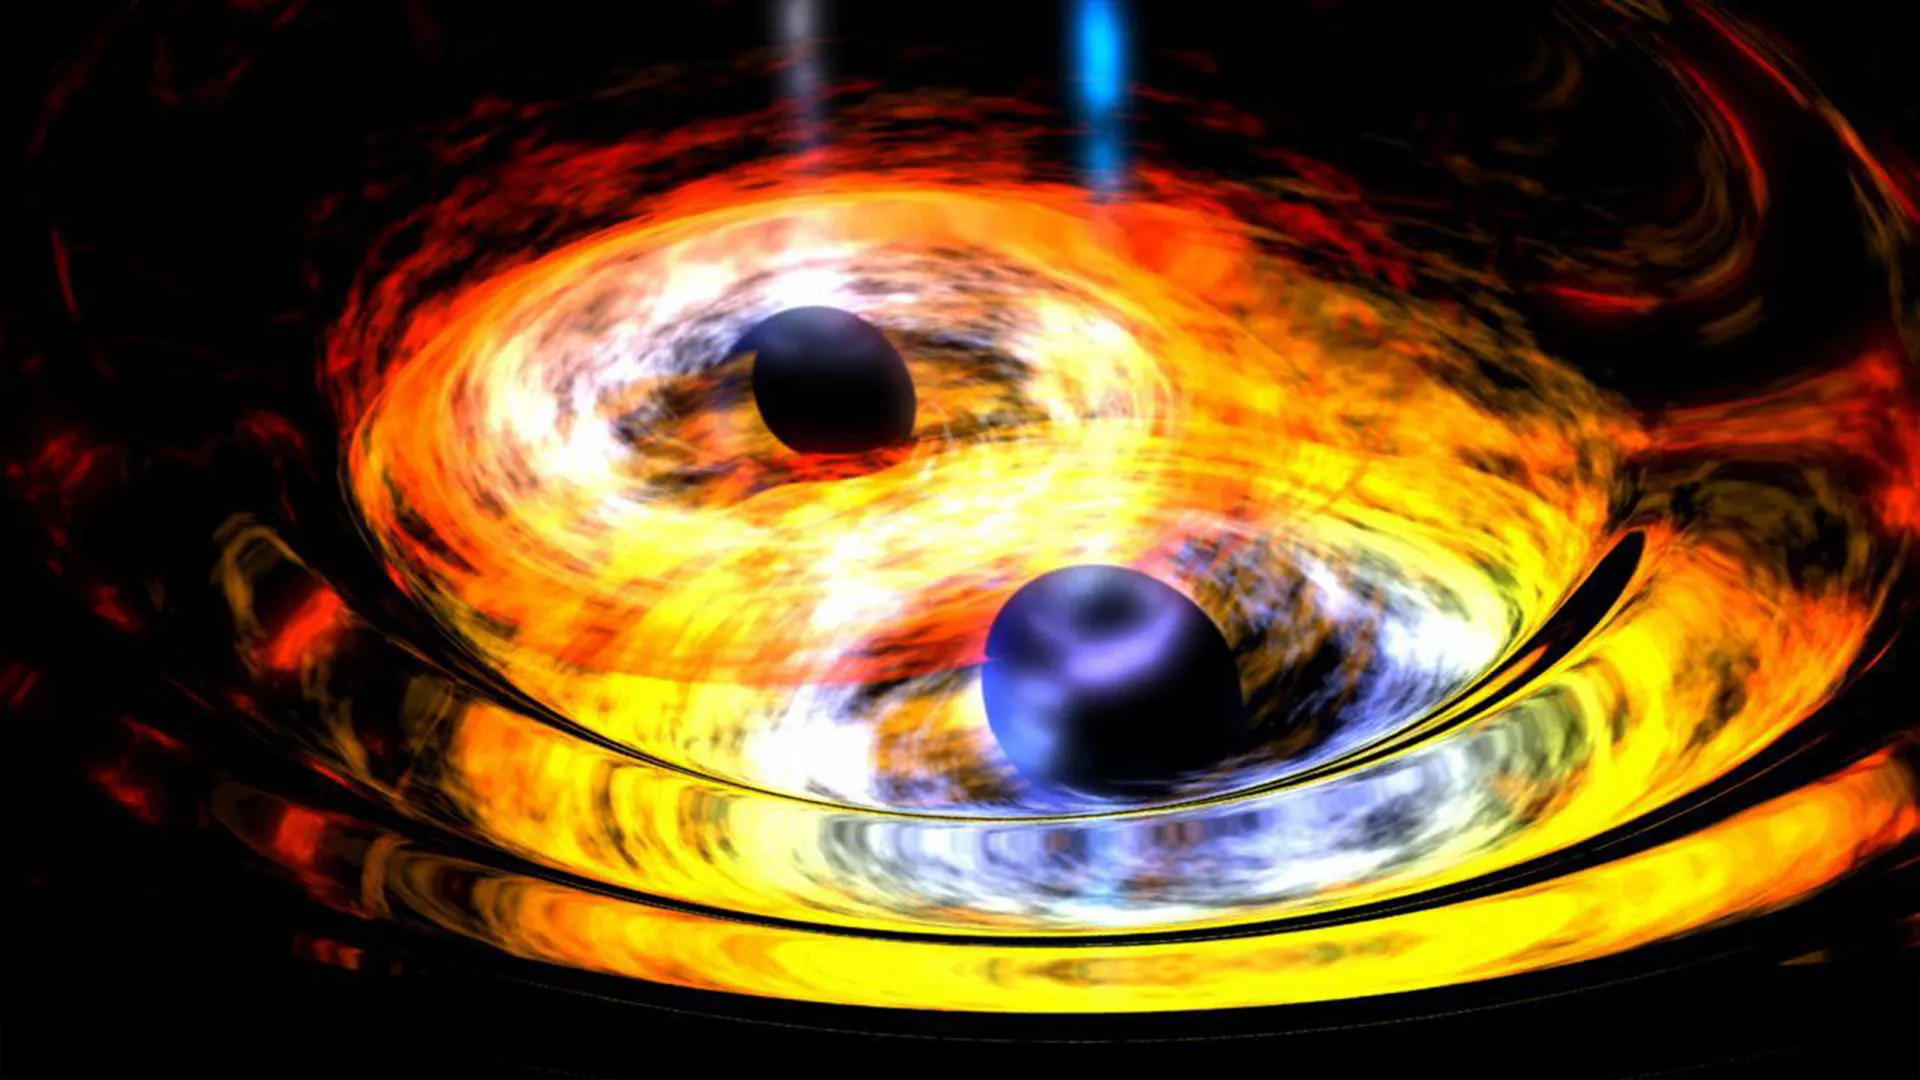 Newly discovered black hole ‘speed limit’ hints at new laws of physics (livescience.com)